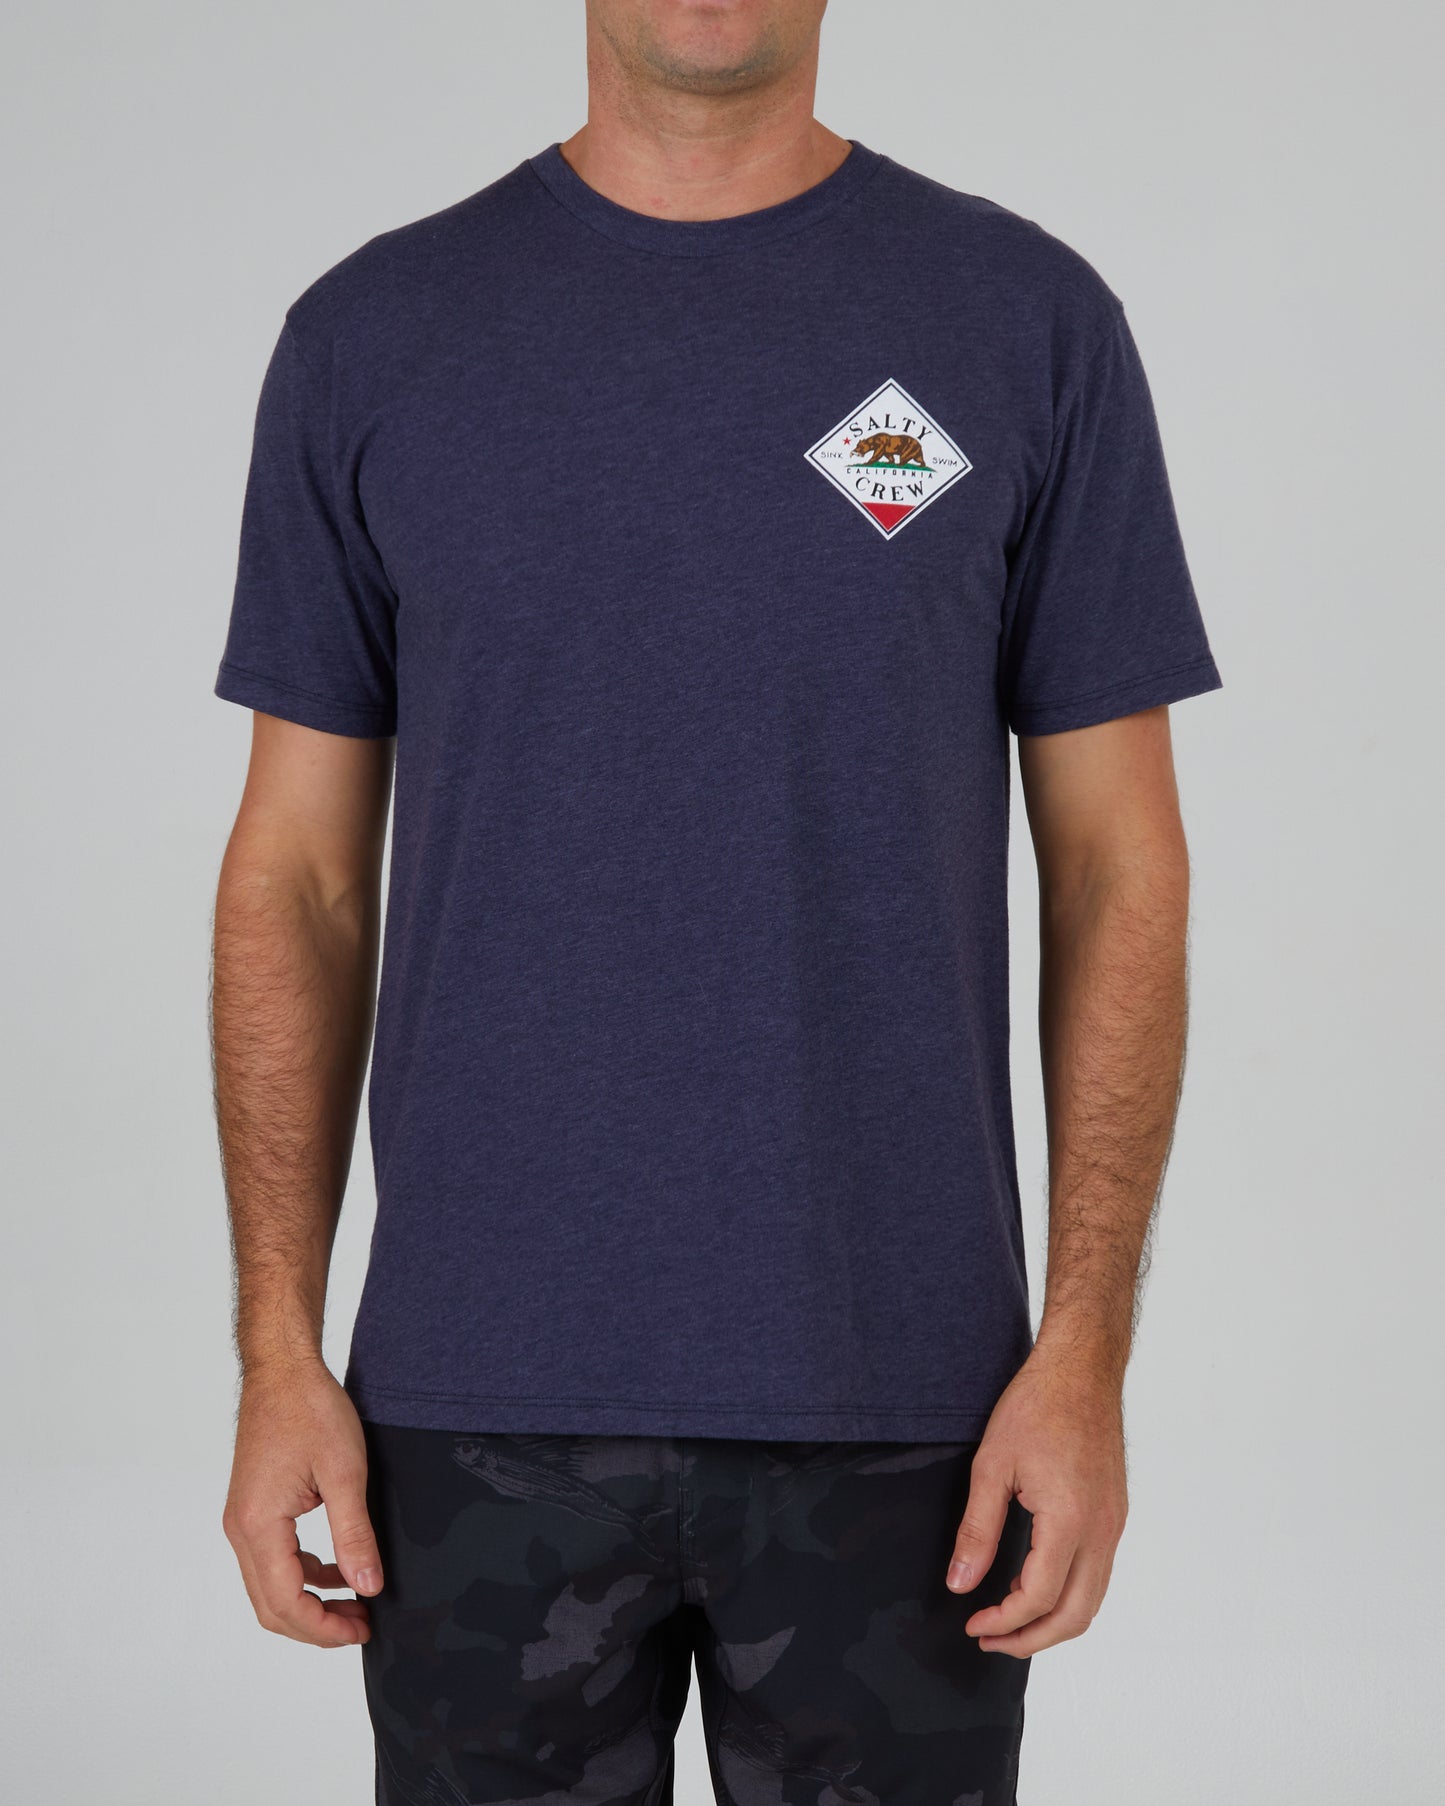 On body front of the Tippet Cali Navy Heather S/S Premium Tee